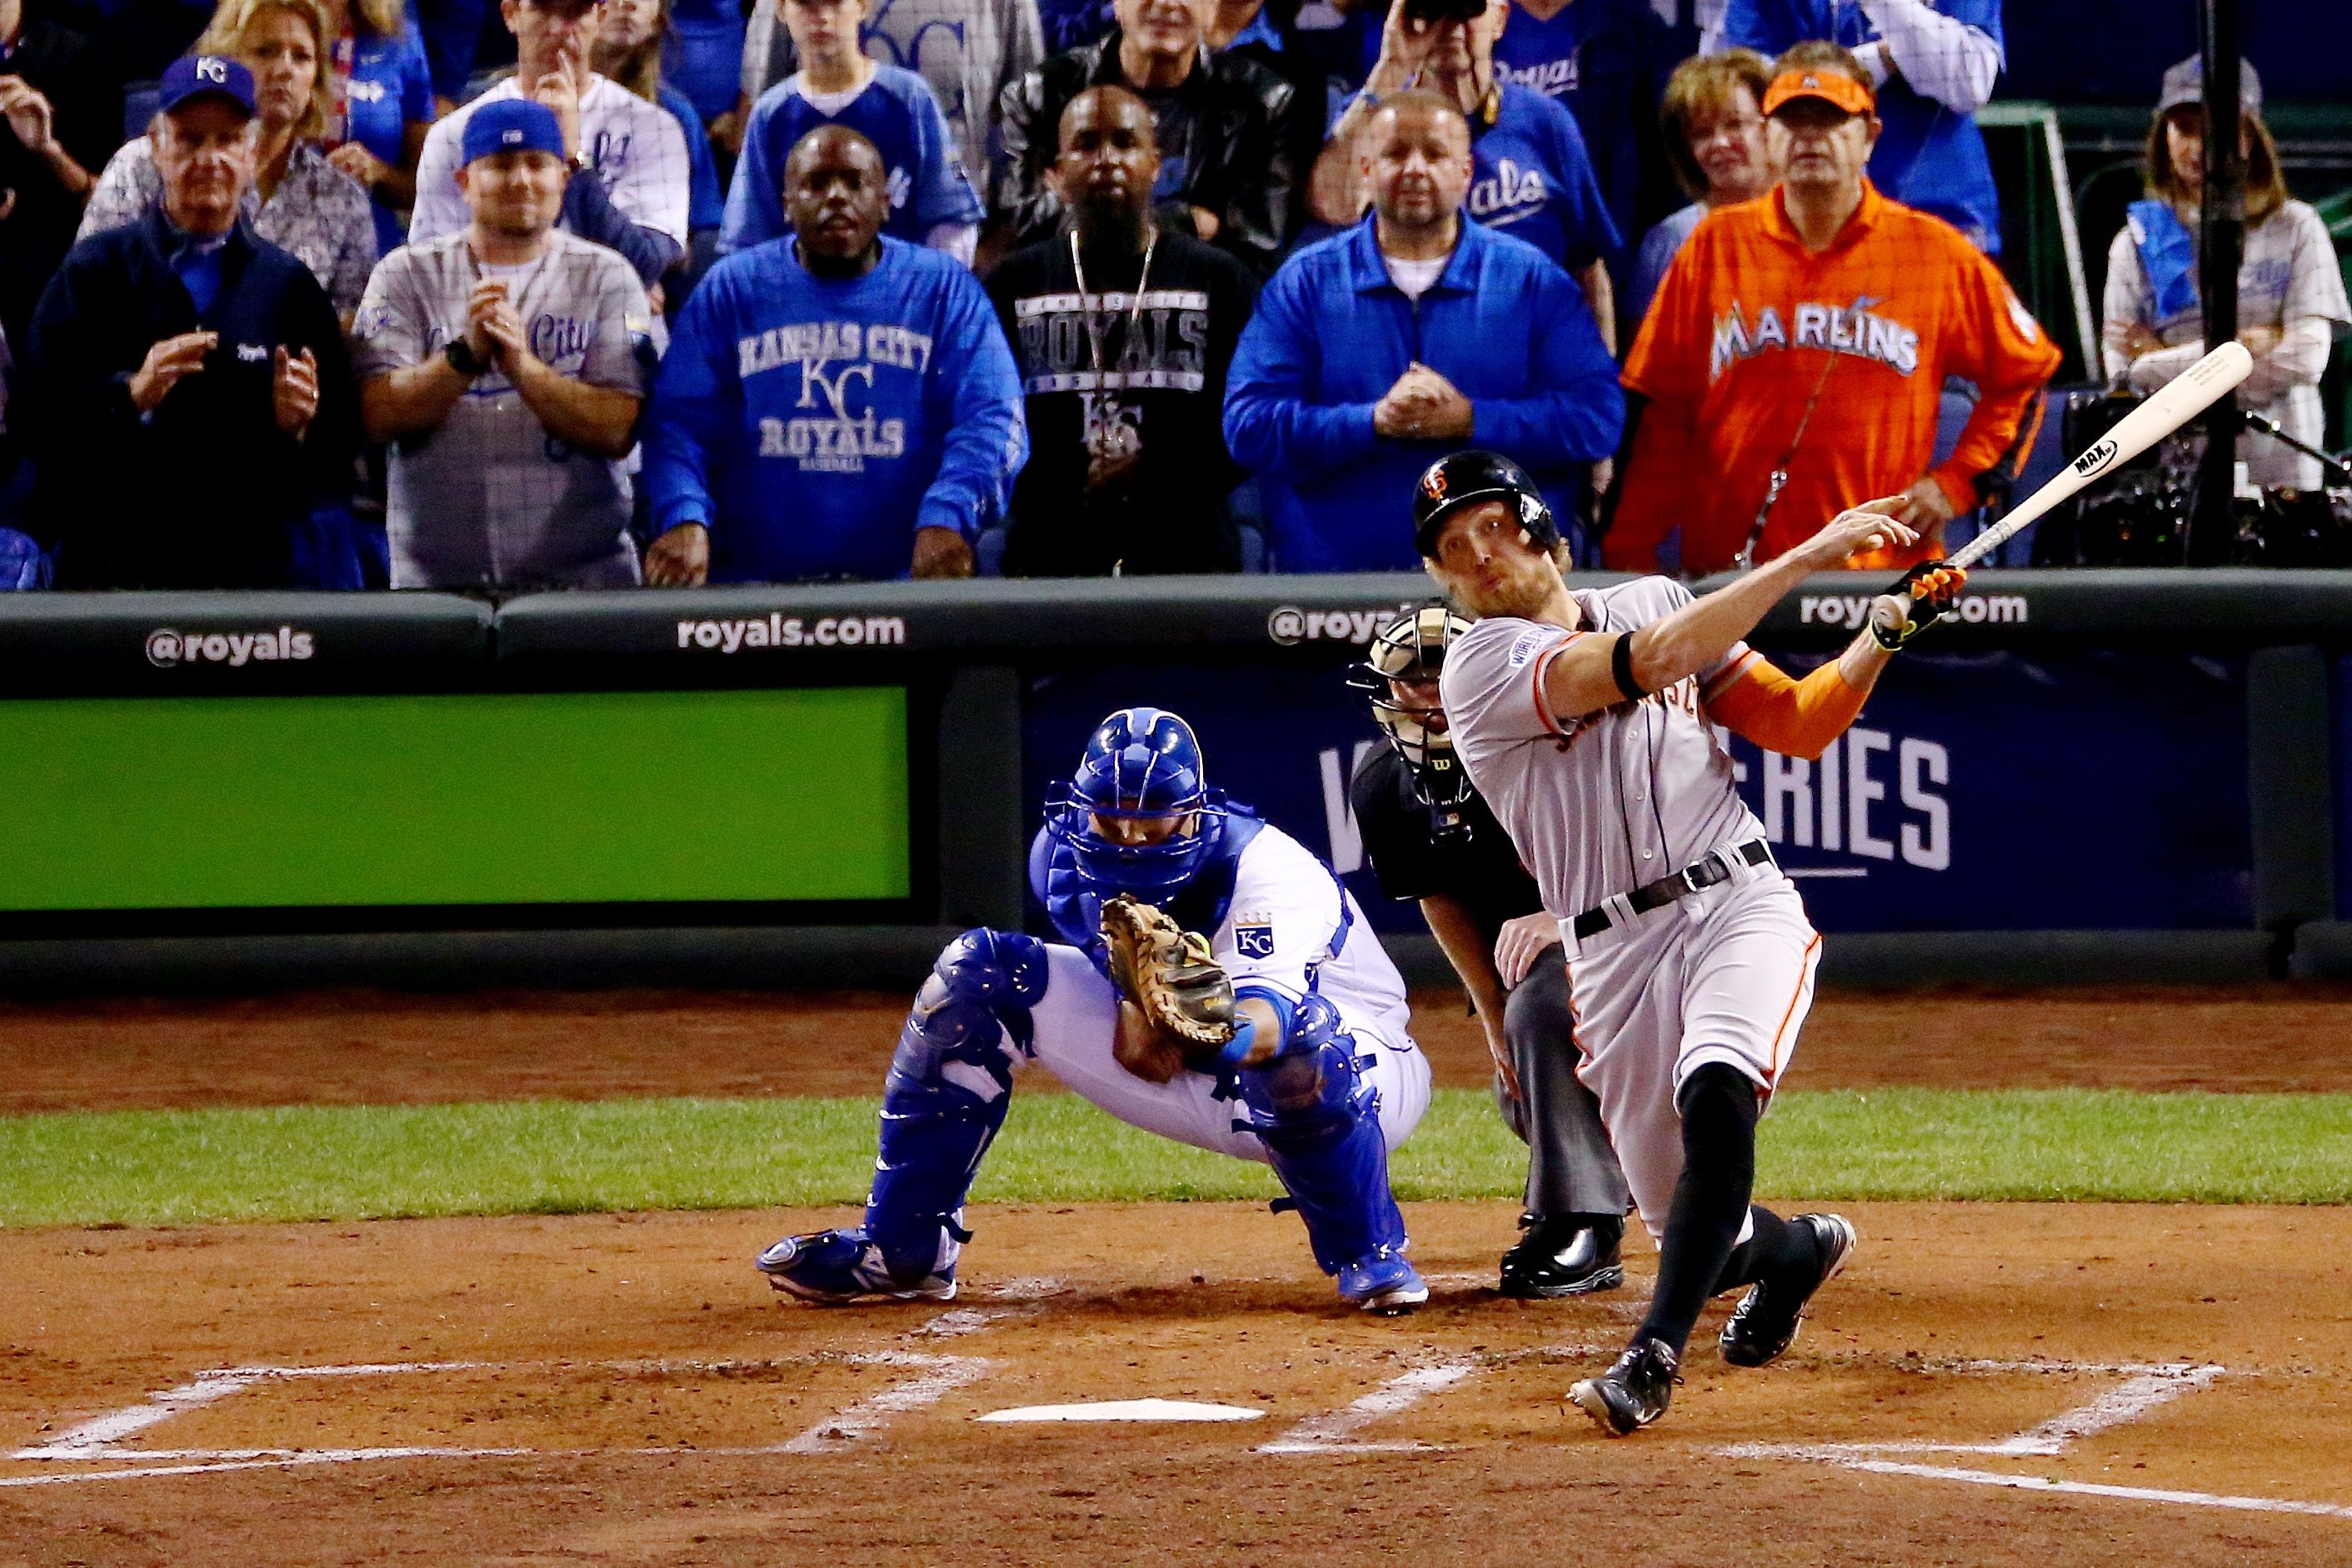 Marlins Man Spotter on X: Marlins Man has been spotted at Game 7